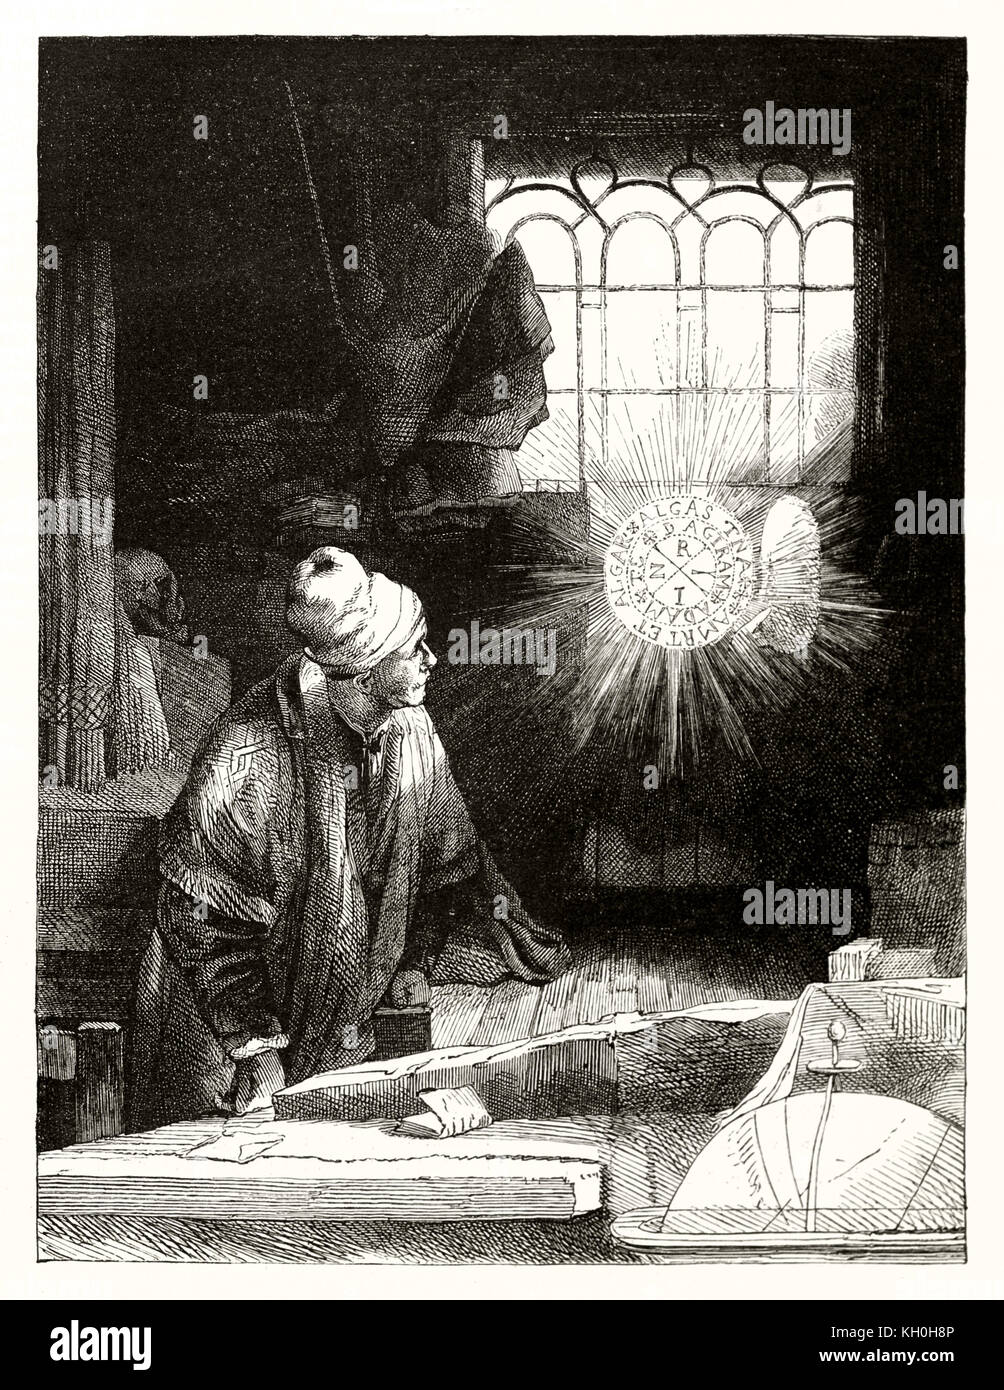 Old engraved reproduction of an etching by Rembrandt depicting Doctor Faustus. By Marvy and Gouchar, publ. on Magasin Pittoresque, Paris, 1847 Stock Photo